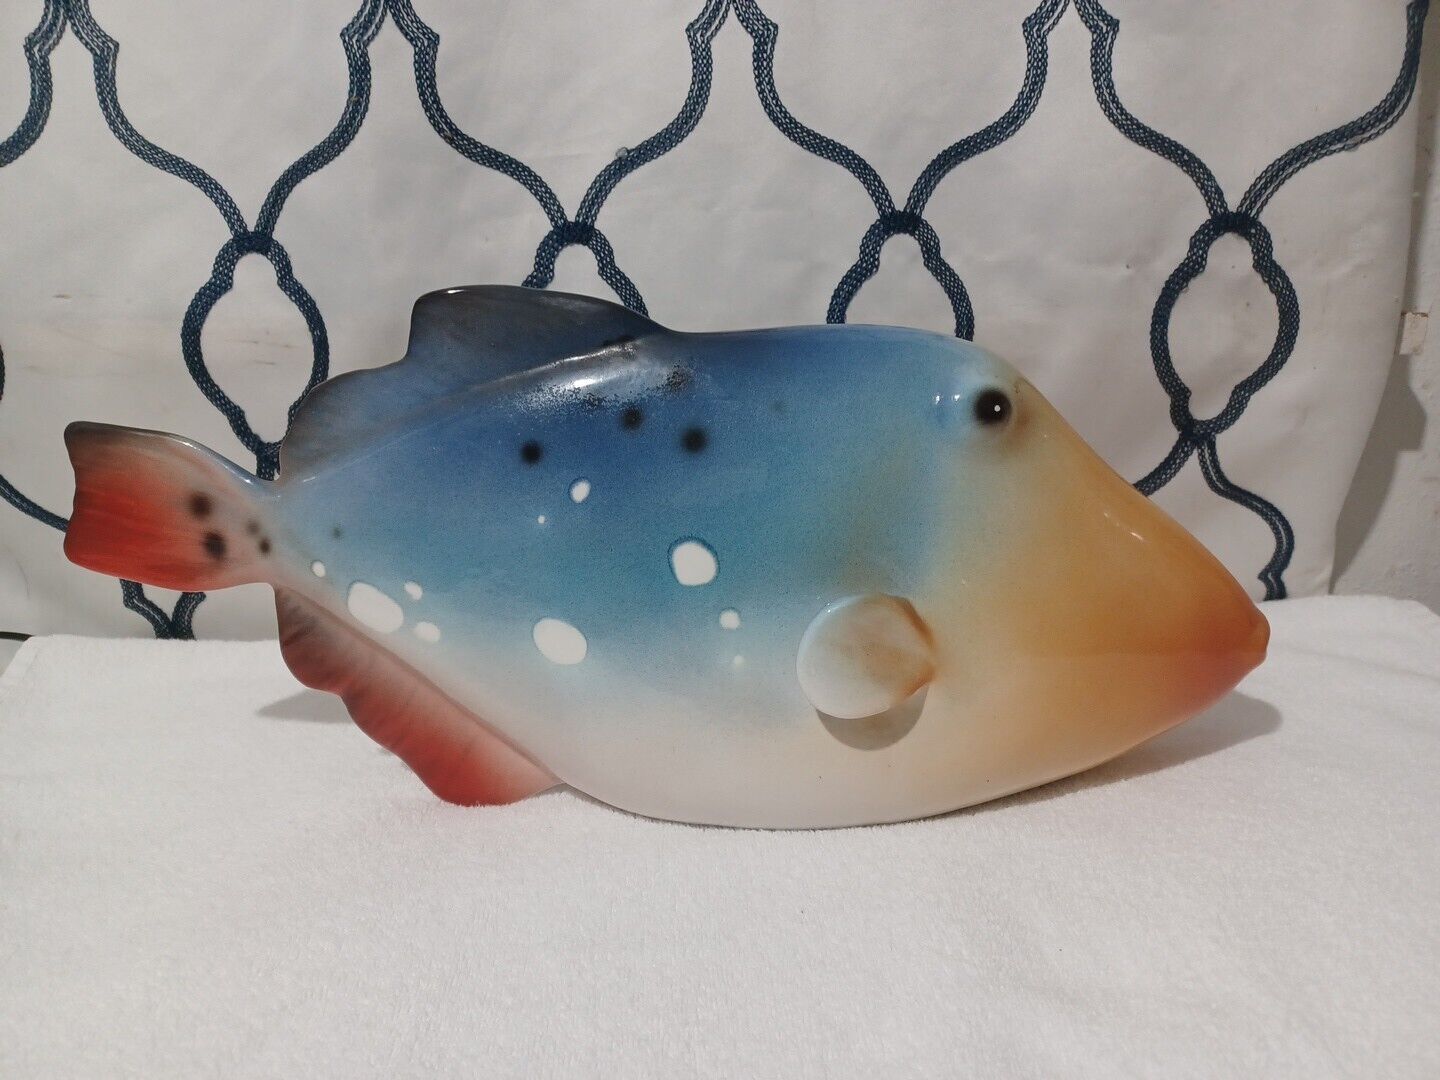 Vintage ceramic fish sculpture Bell Europa Made in Italy , Large 